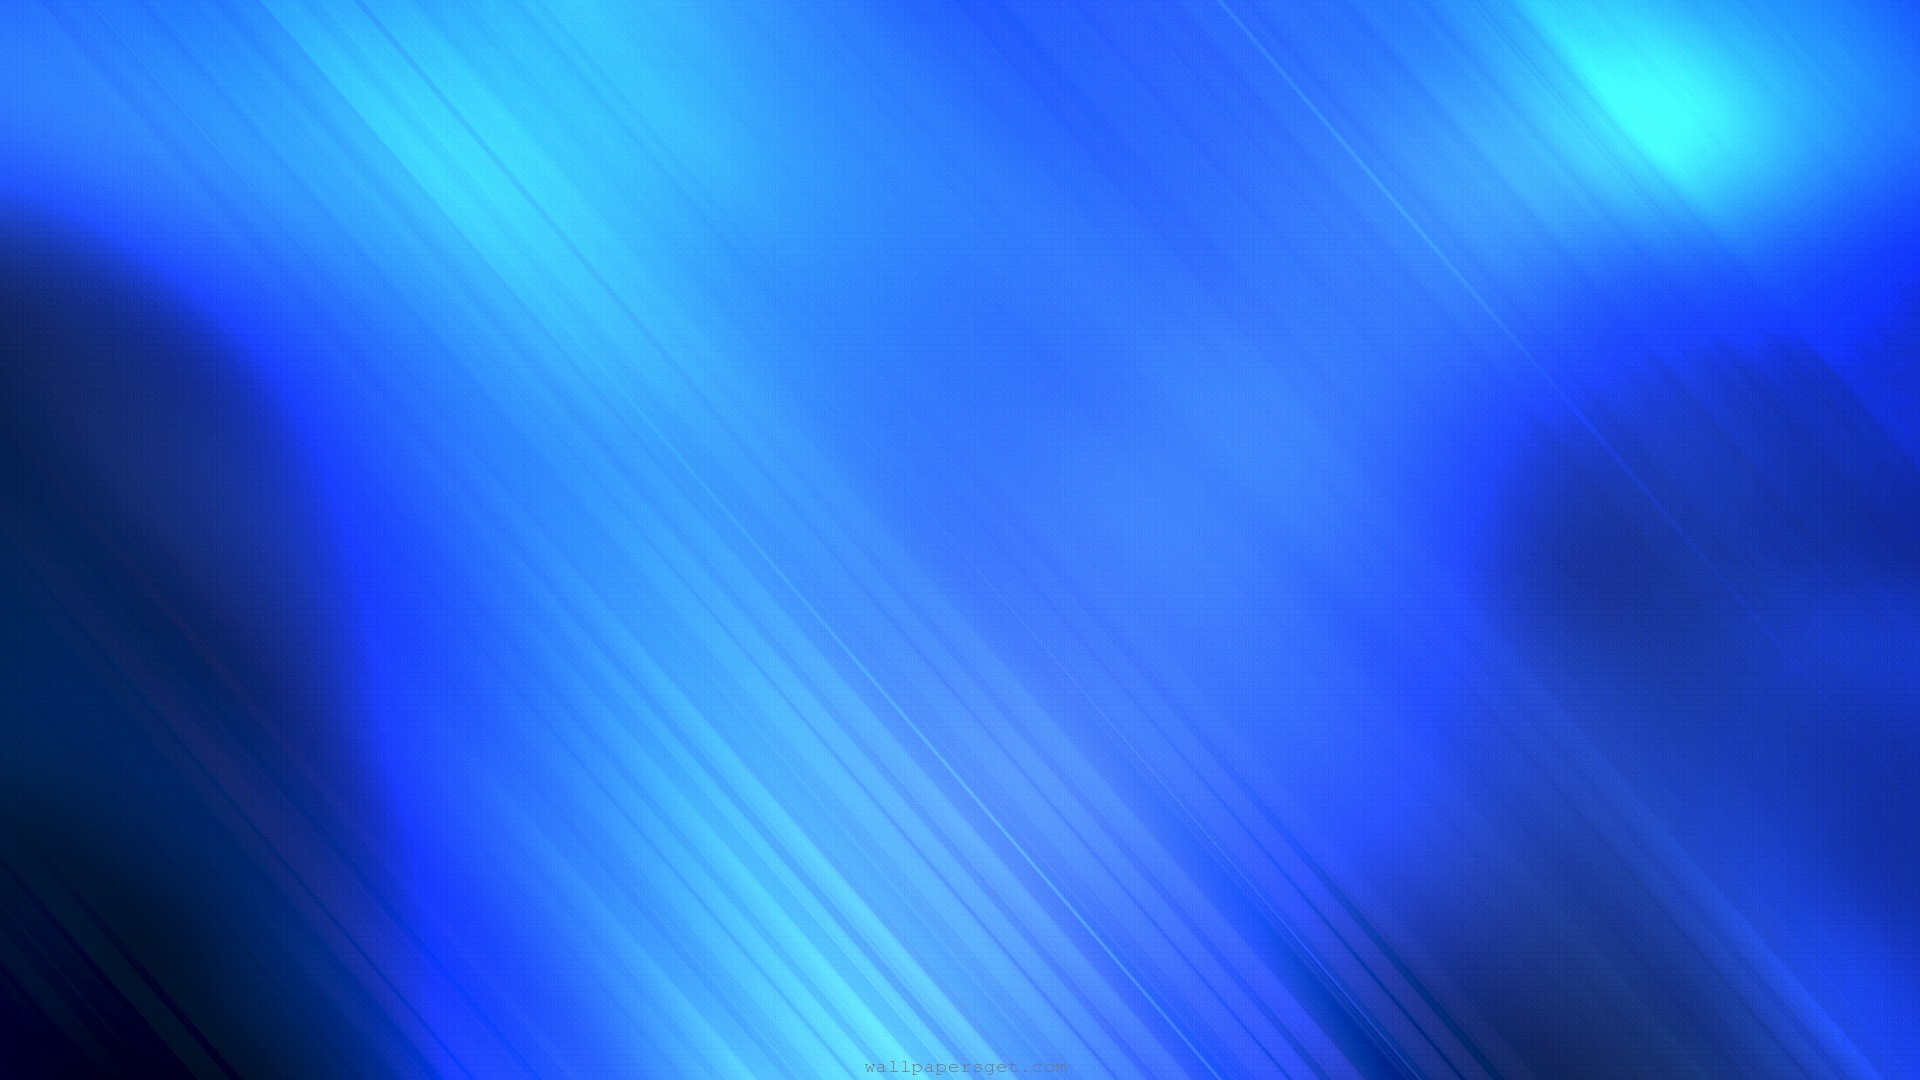 Blue Abstract Background 2042 Hd Wallpapers in Abstract – Imagesci.com |  Screen Savers | Pinterest | Blue wallpapers and Wallpaper